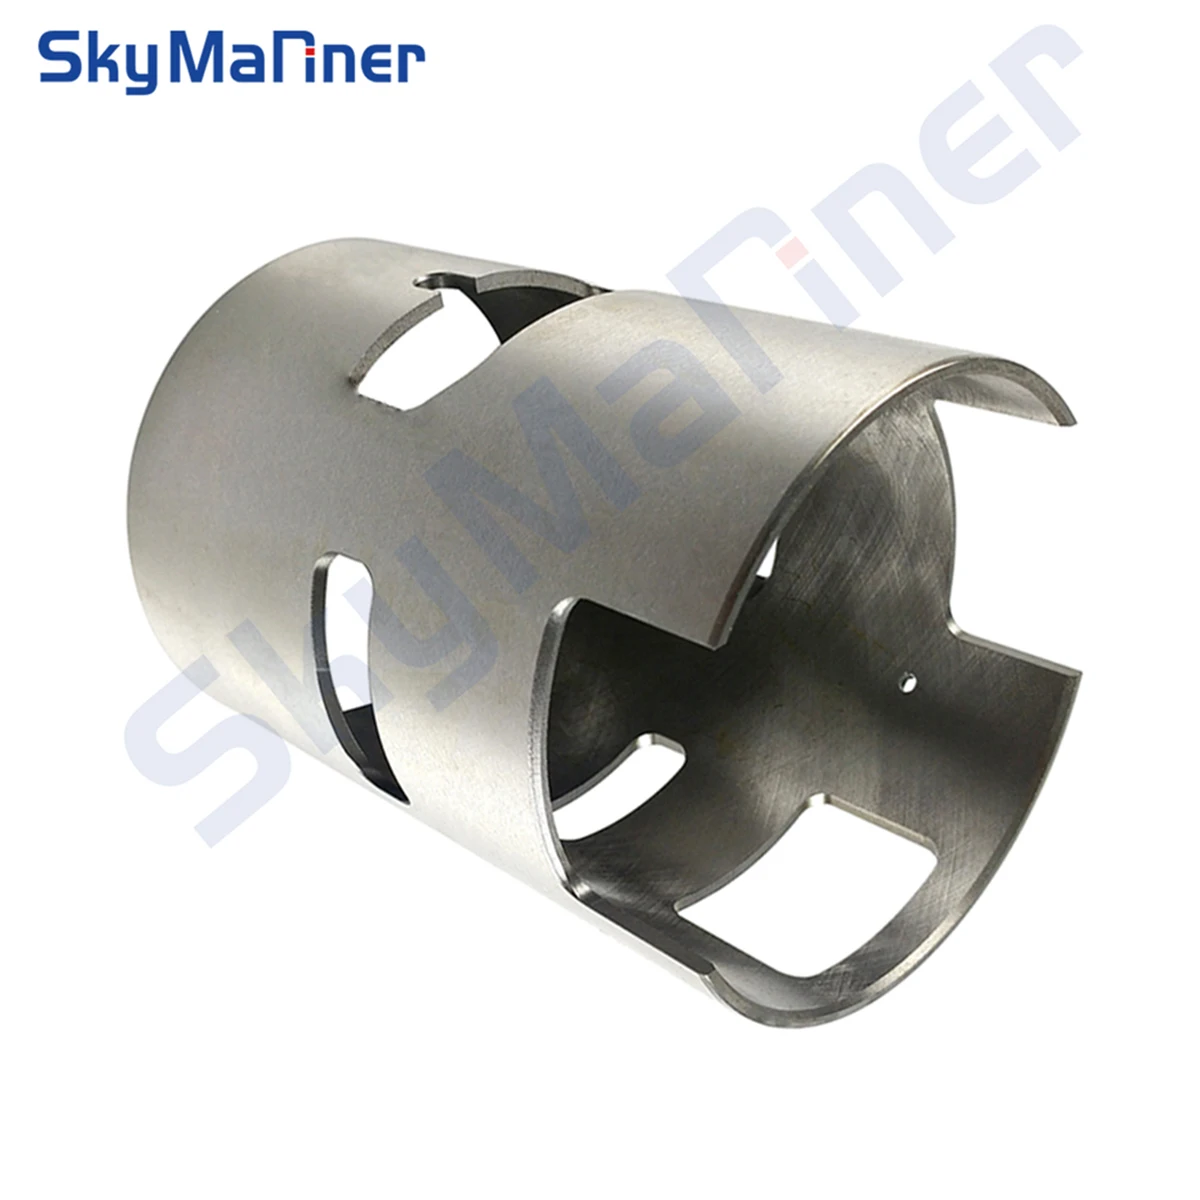 6E5-10935 ID 90mm Left Cylinder Liner Sleeve For Yamaha Outboard Motor Parts 2T 115HP Outboard V4 6E5-10935-00-L